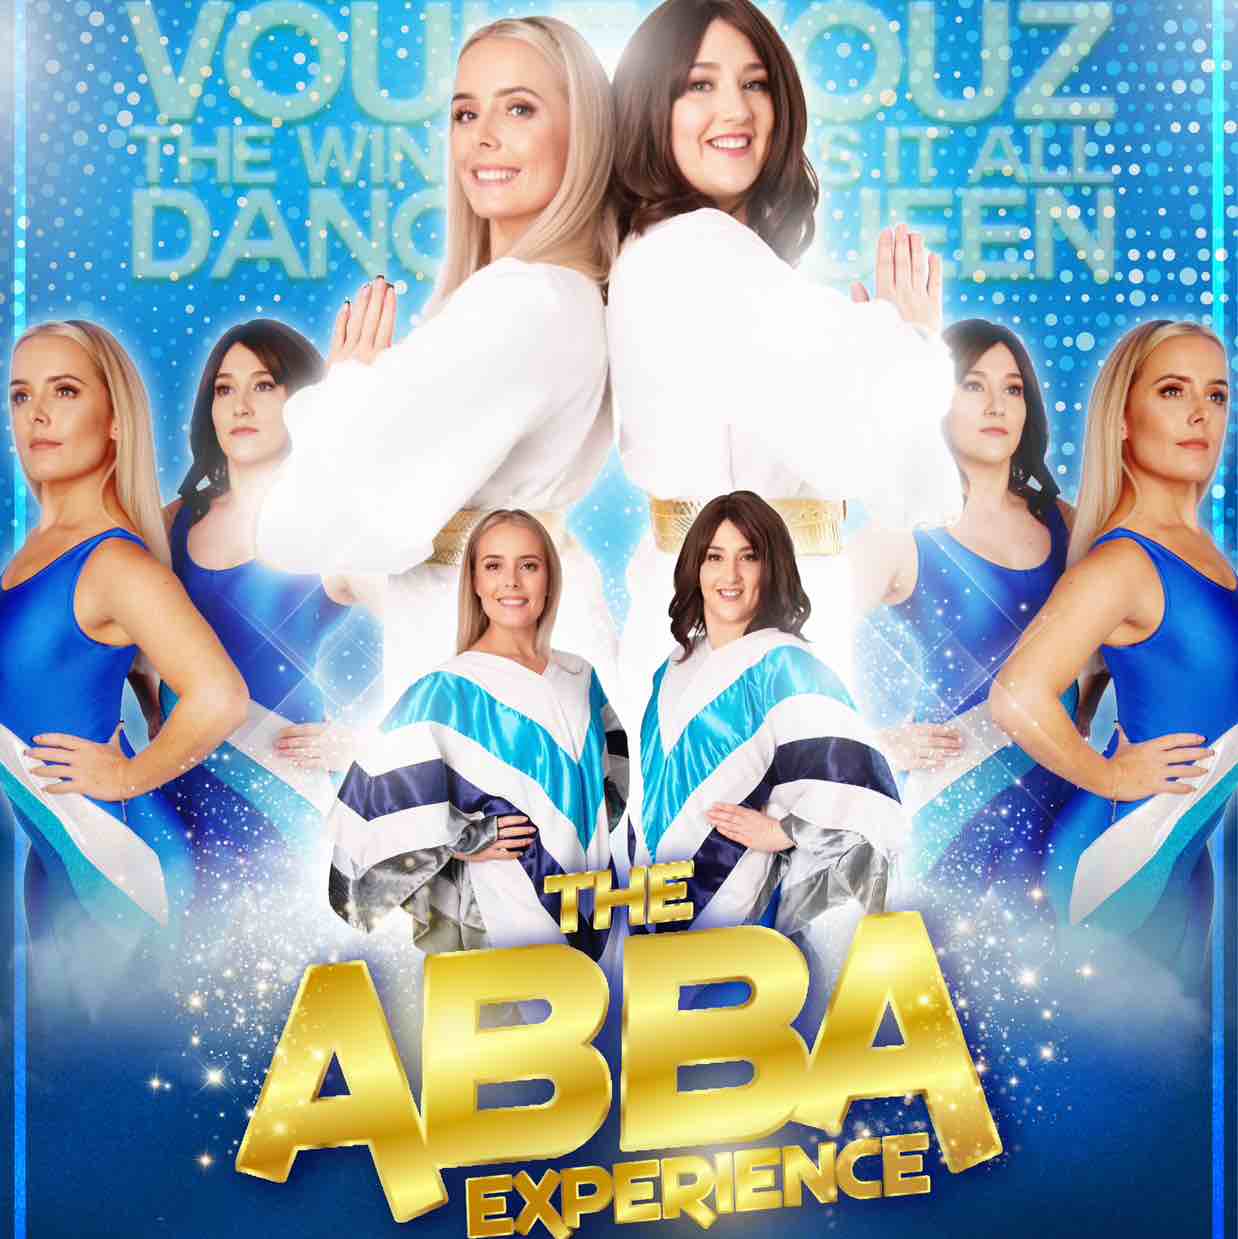 The Abba Experience